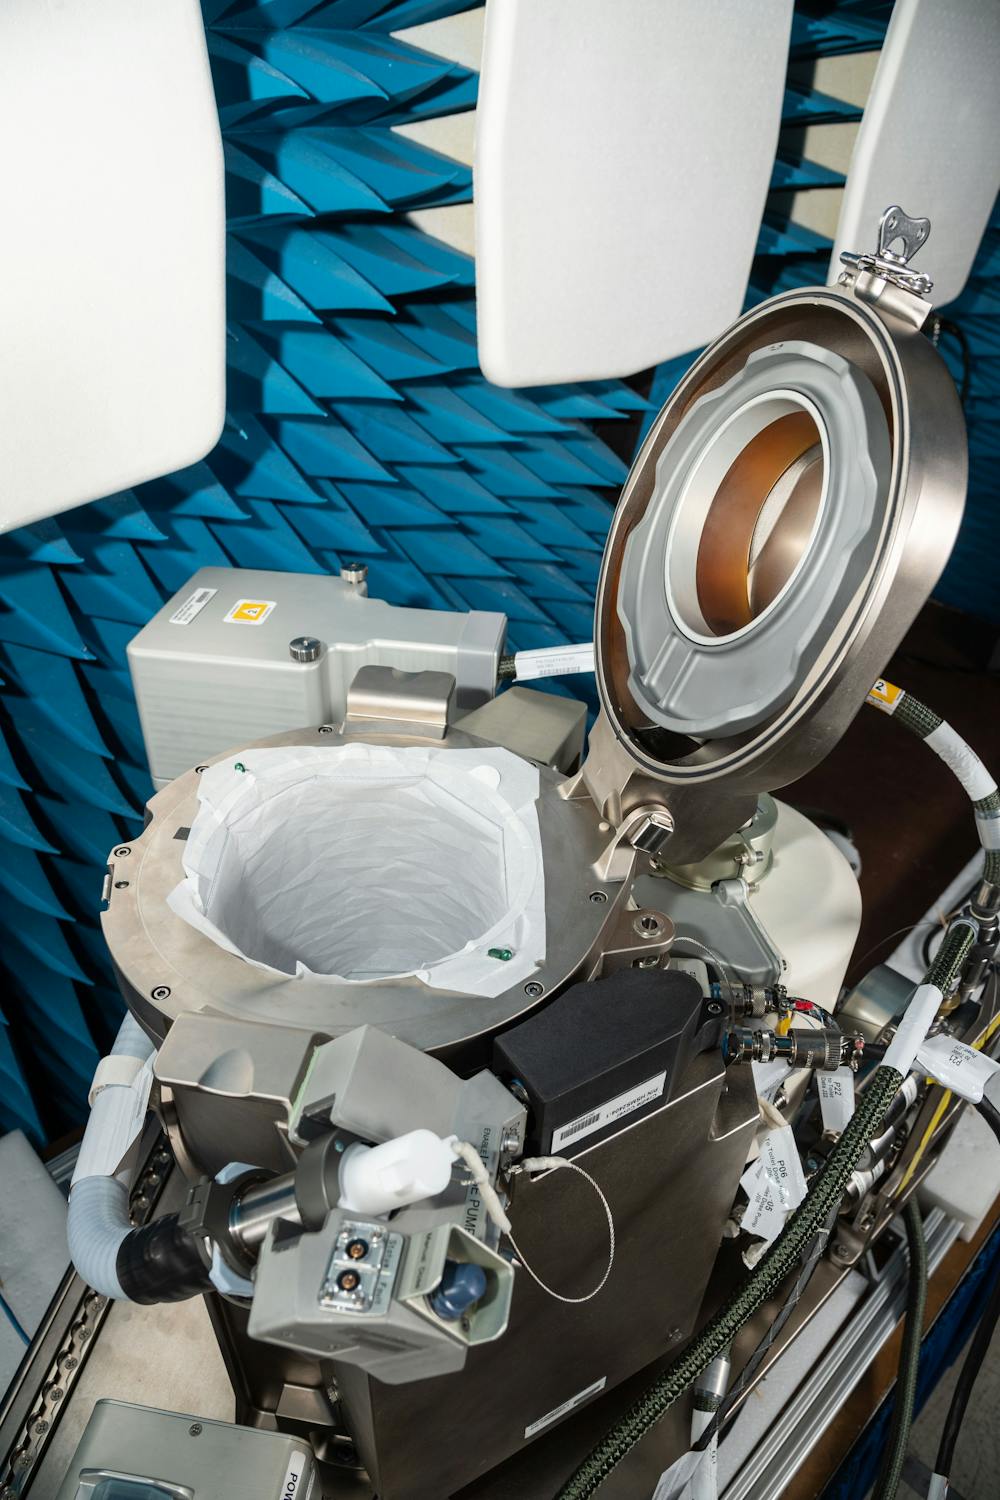 IV. The Challenges of Using Toilets in Space